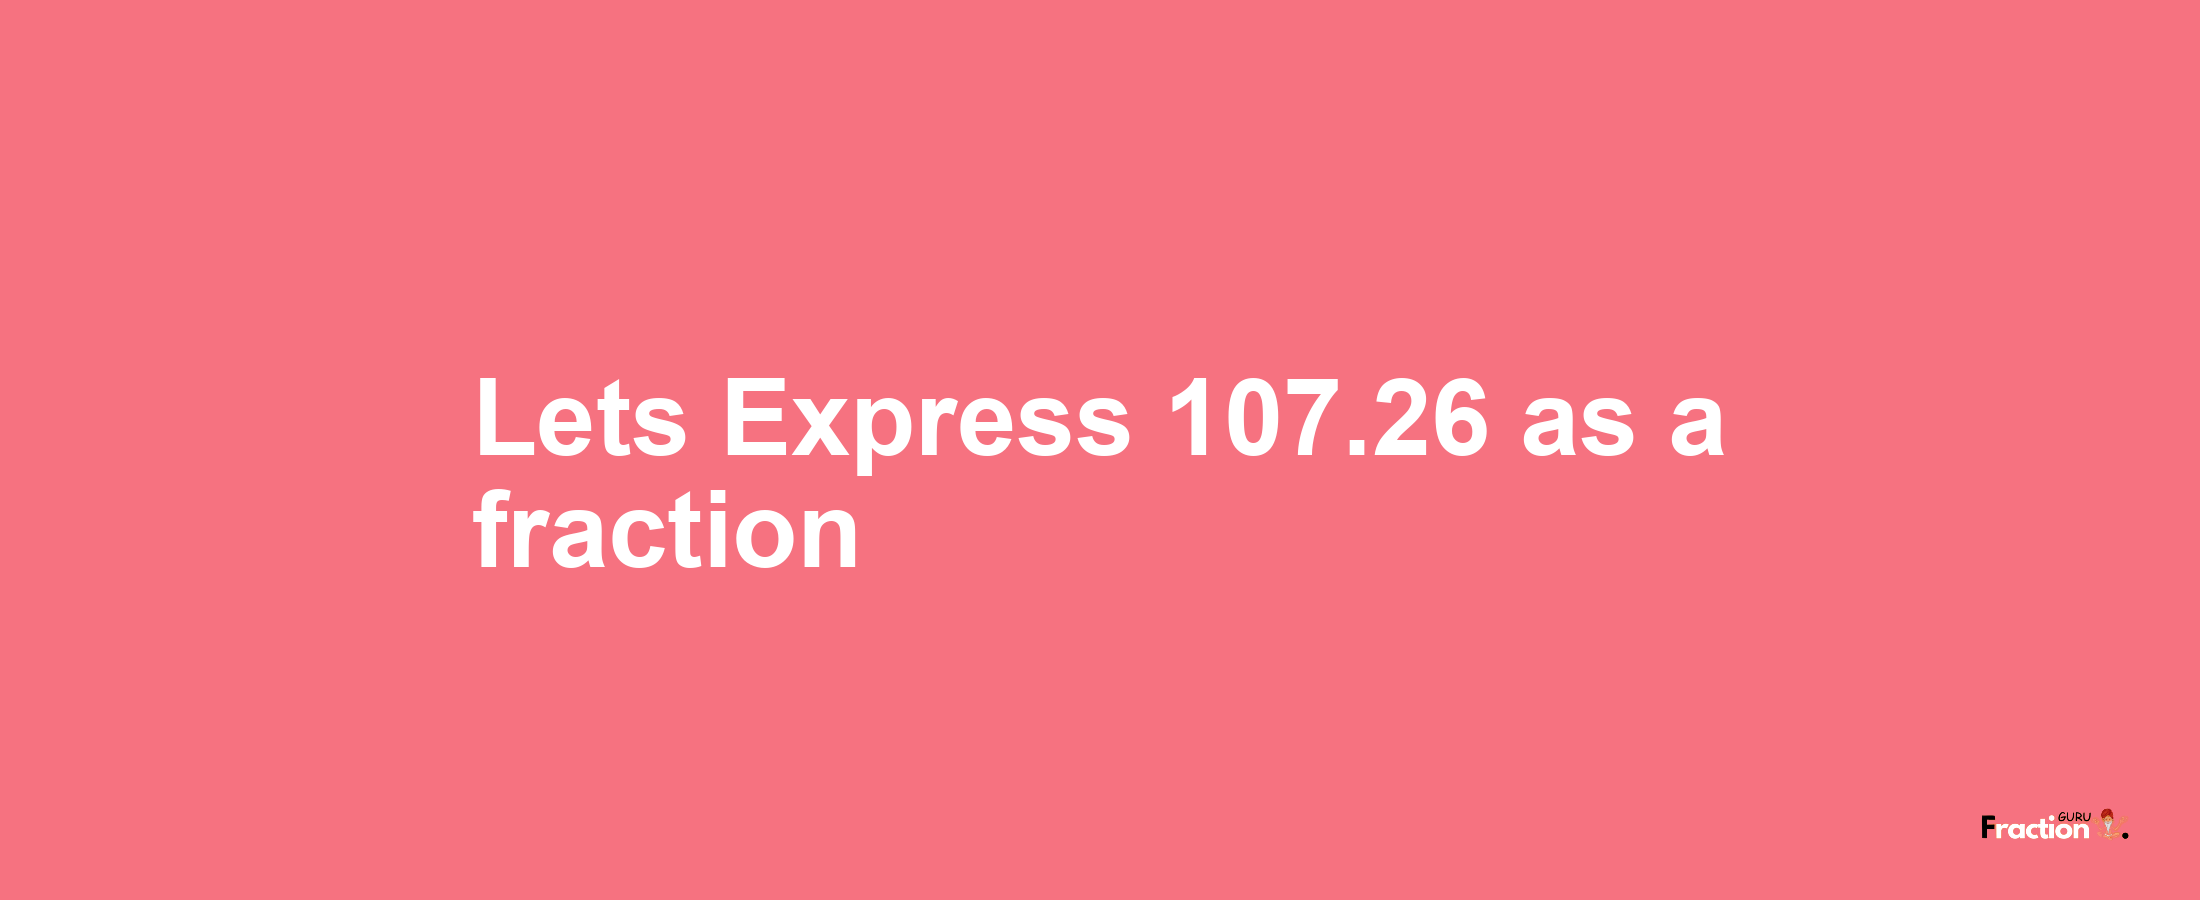 Lets Express 107.26 as afraction